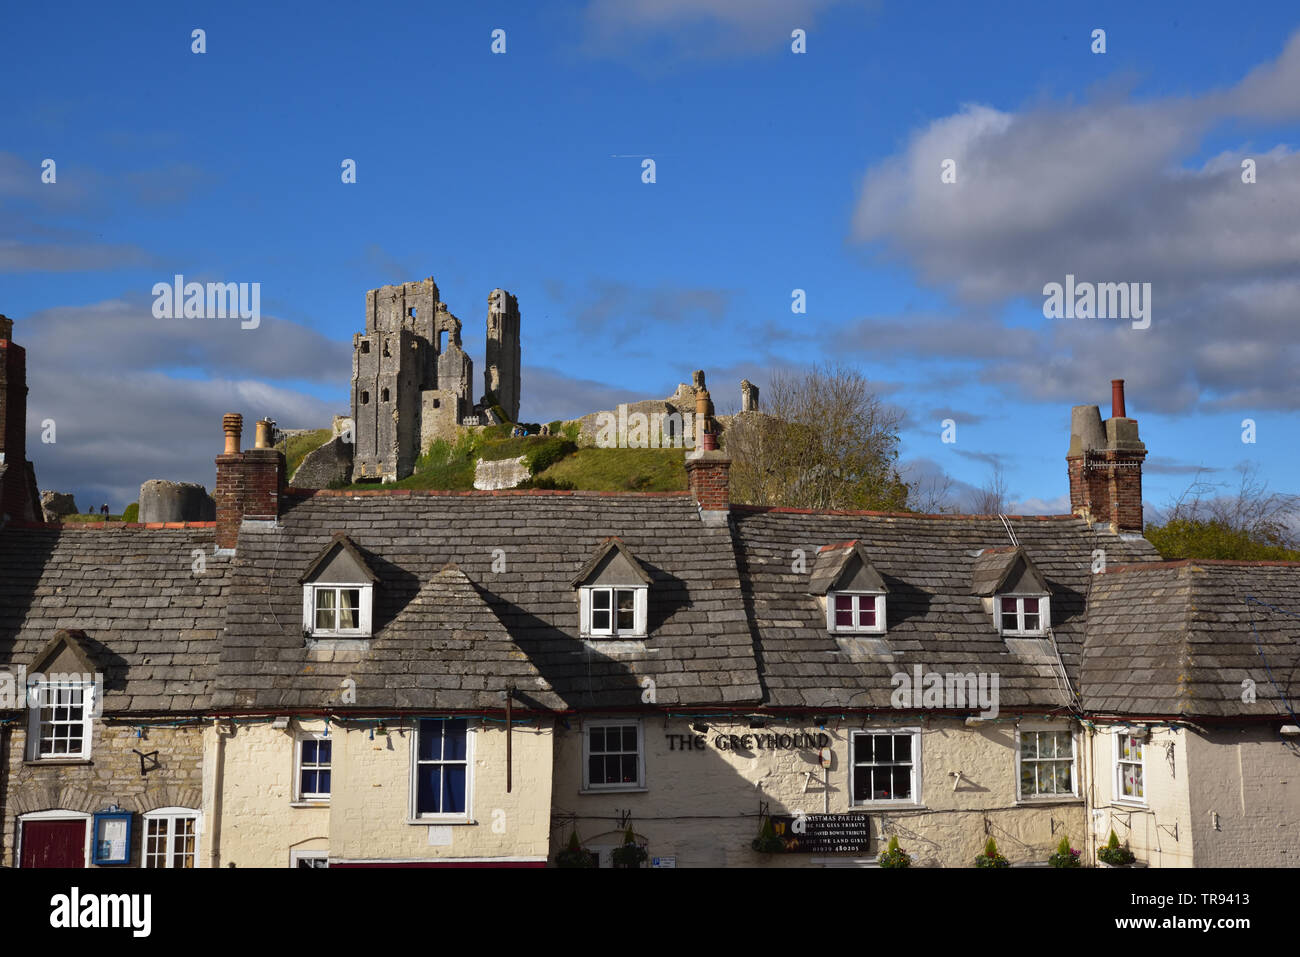 The ruins of Corfe Castle perched on top of a hill behind the Greyhound pub. Stock Photo